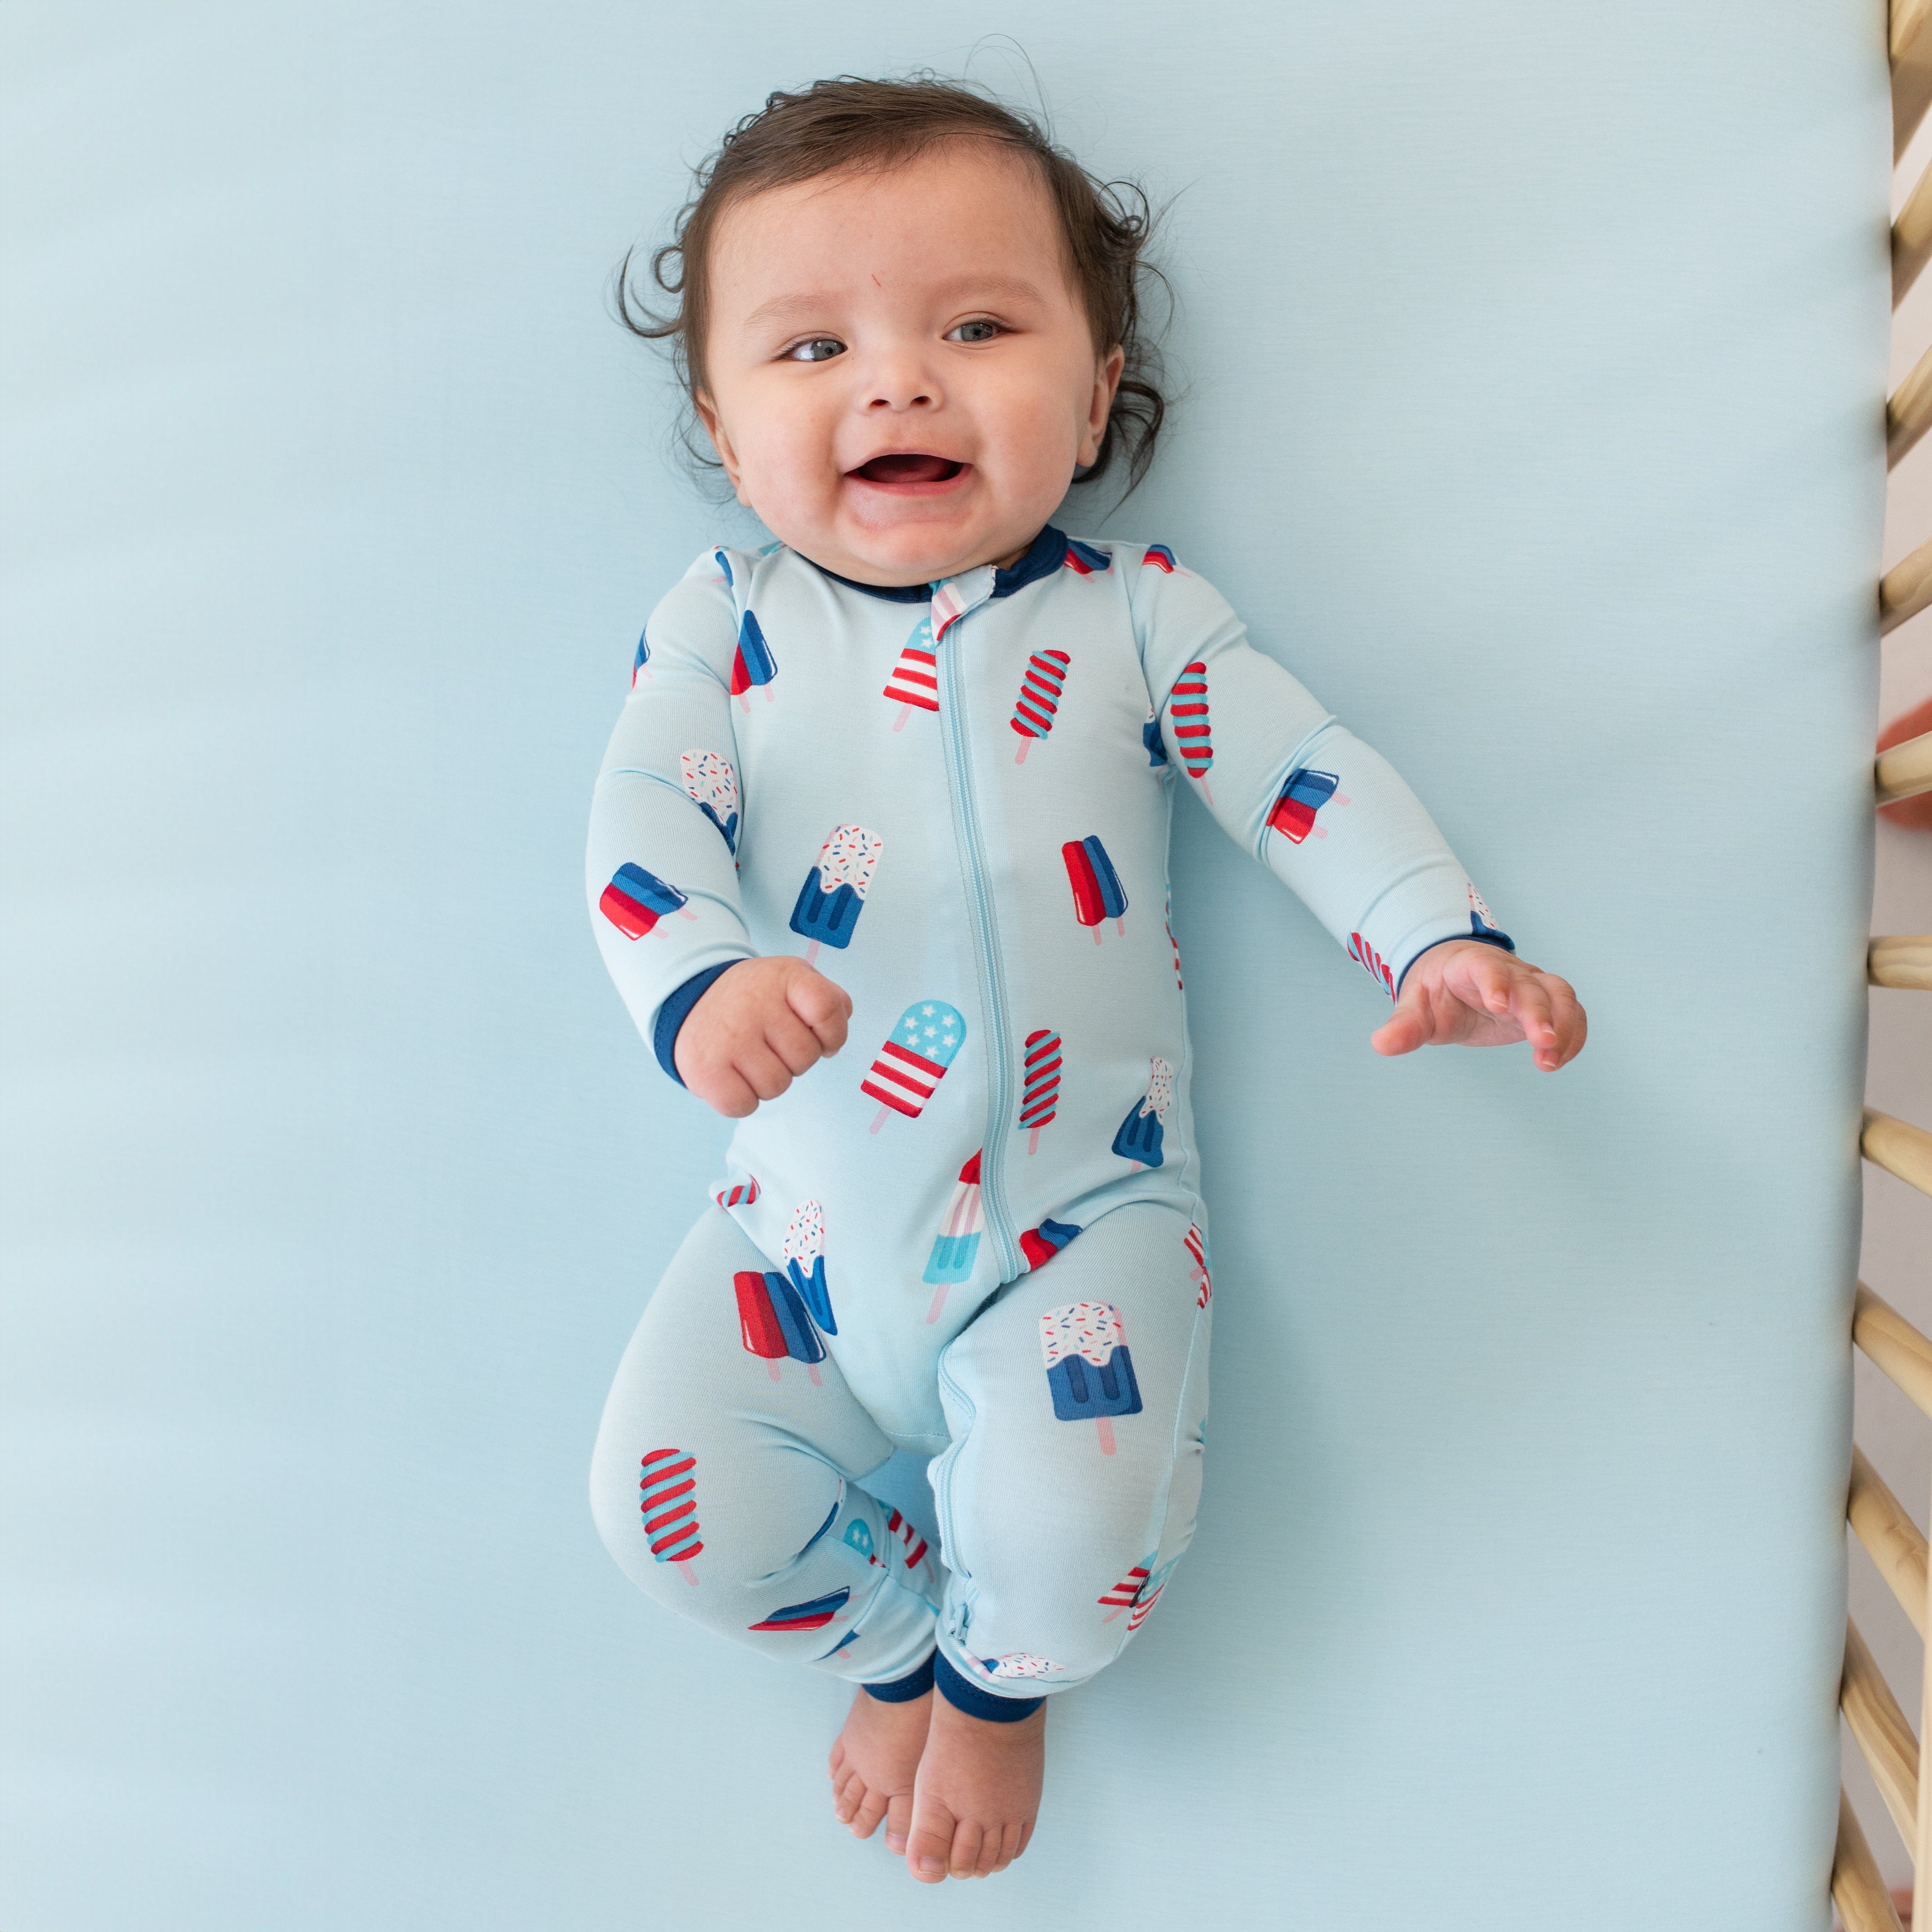 Infant wearing Kyte Baby Zippered Romper in Popsicle